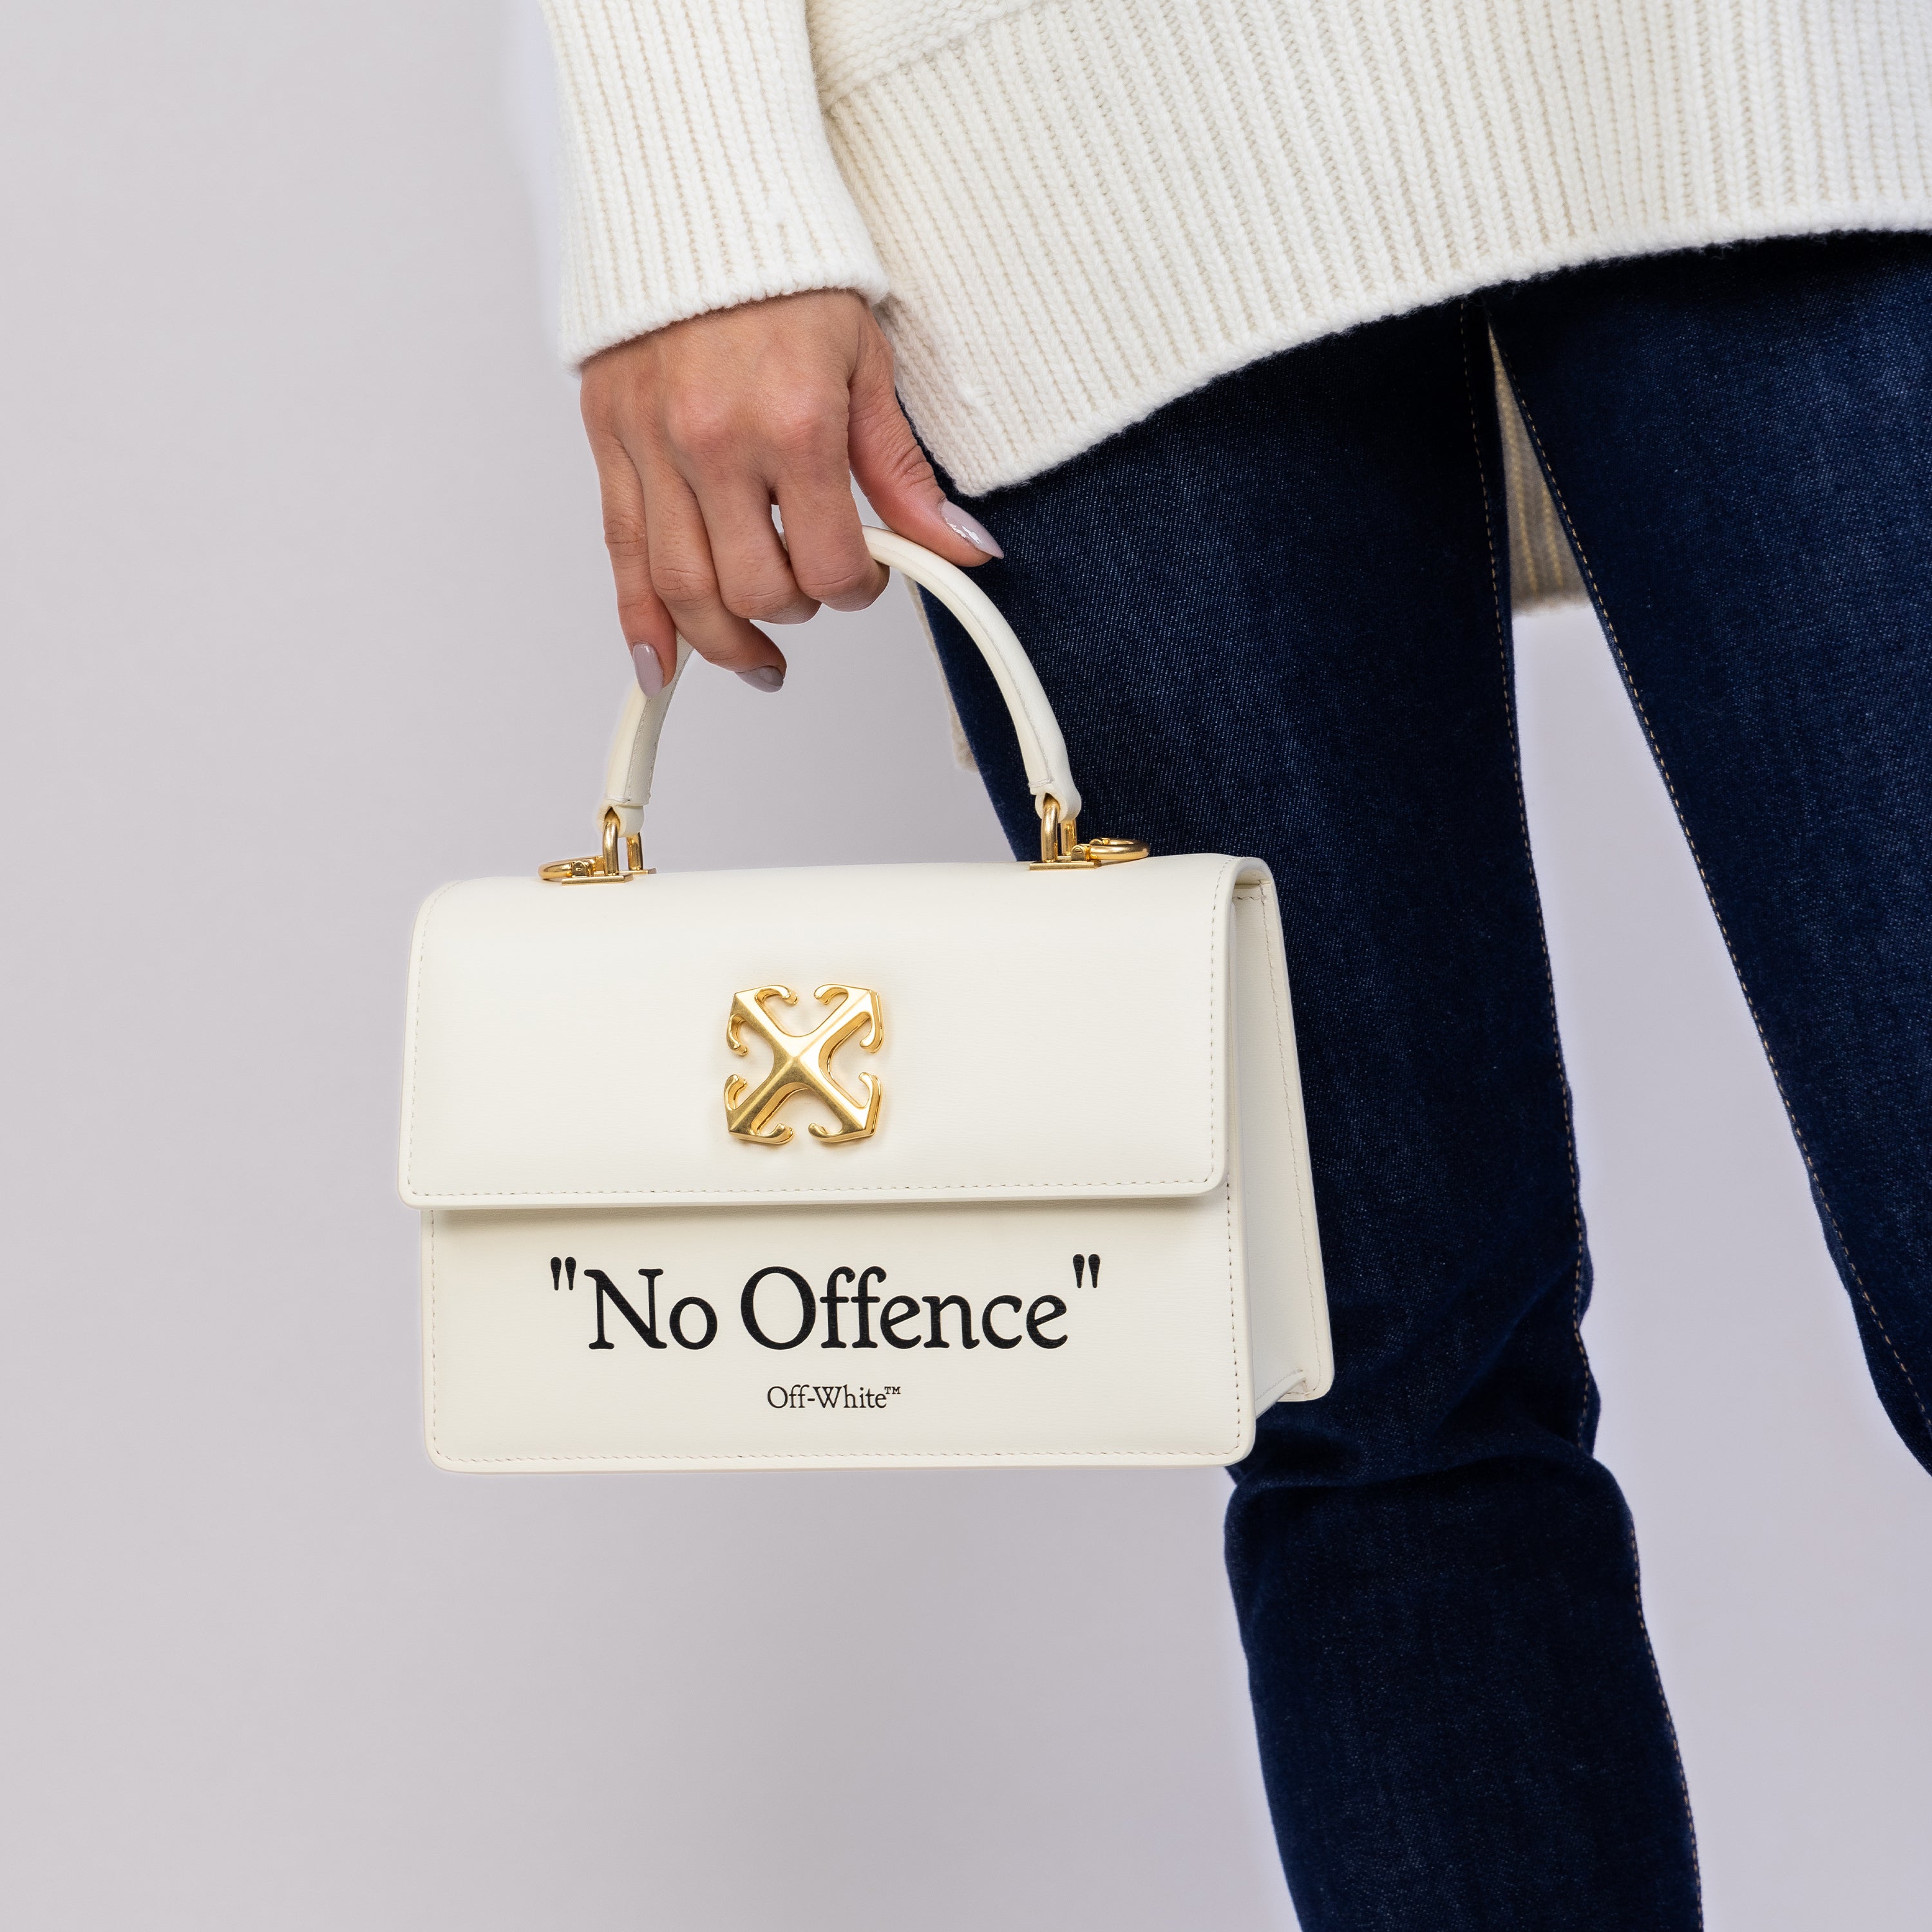 Cartera Beige Off-White Jitney 1.4 "No Offence"